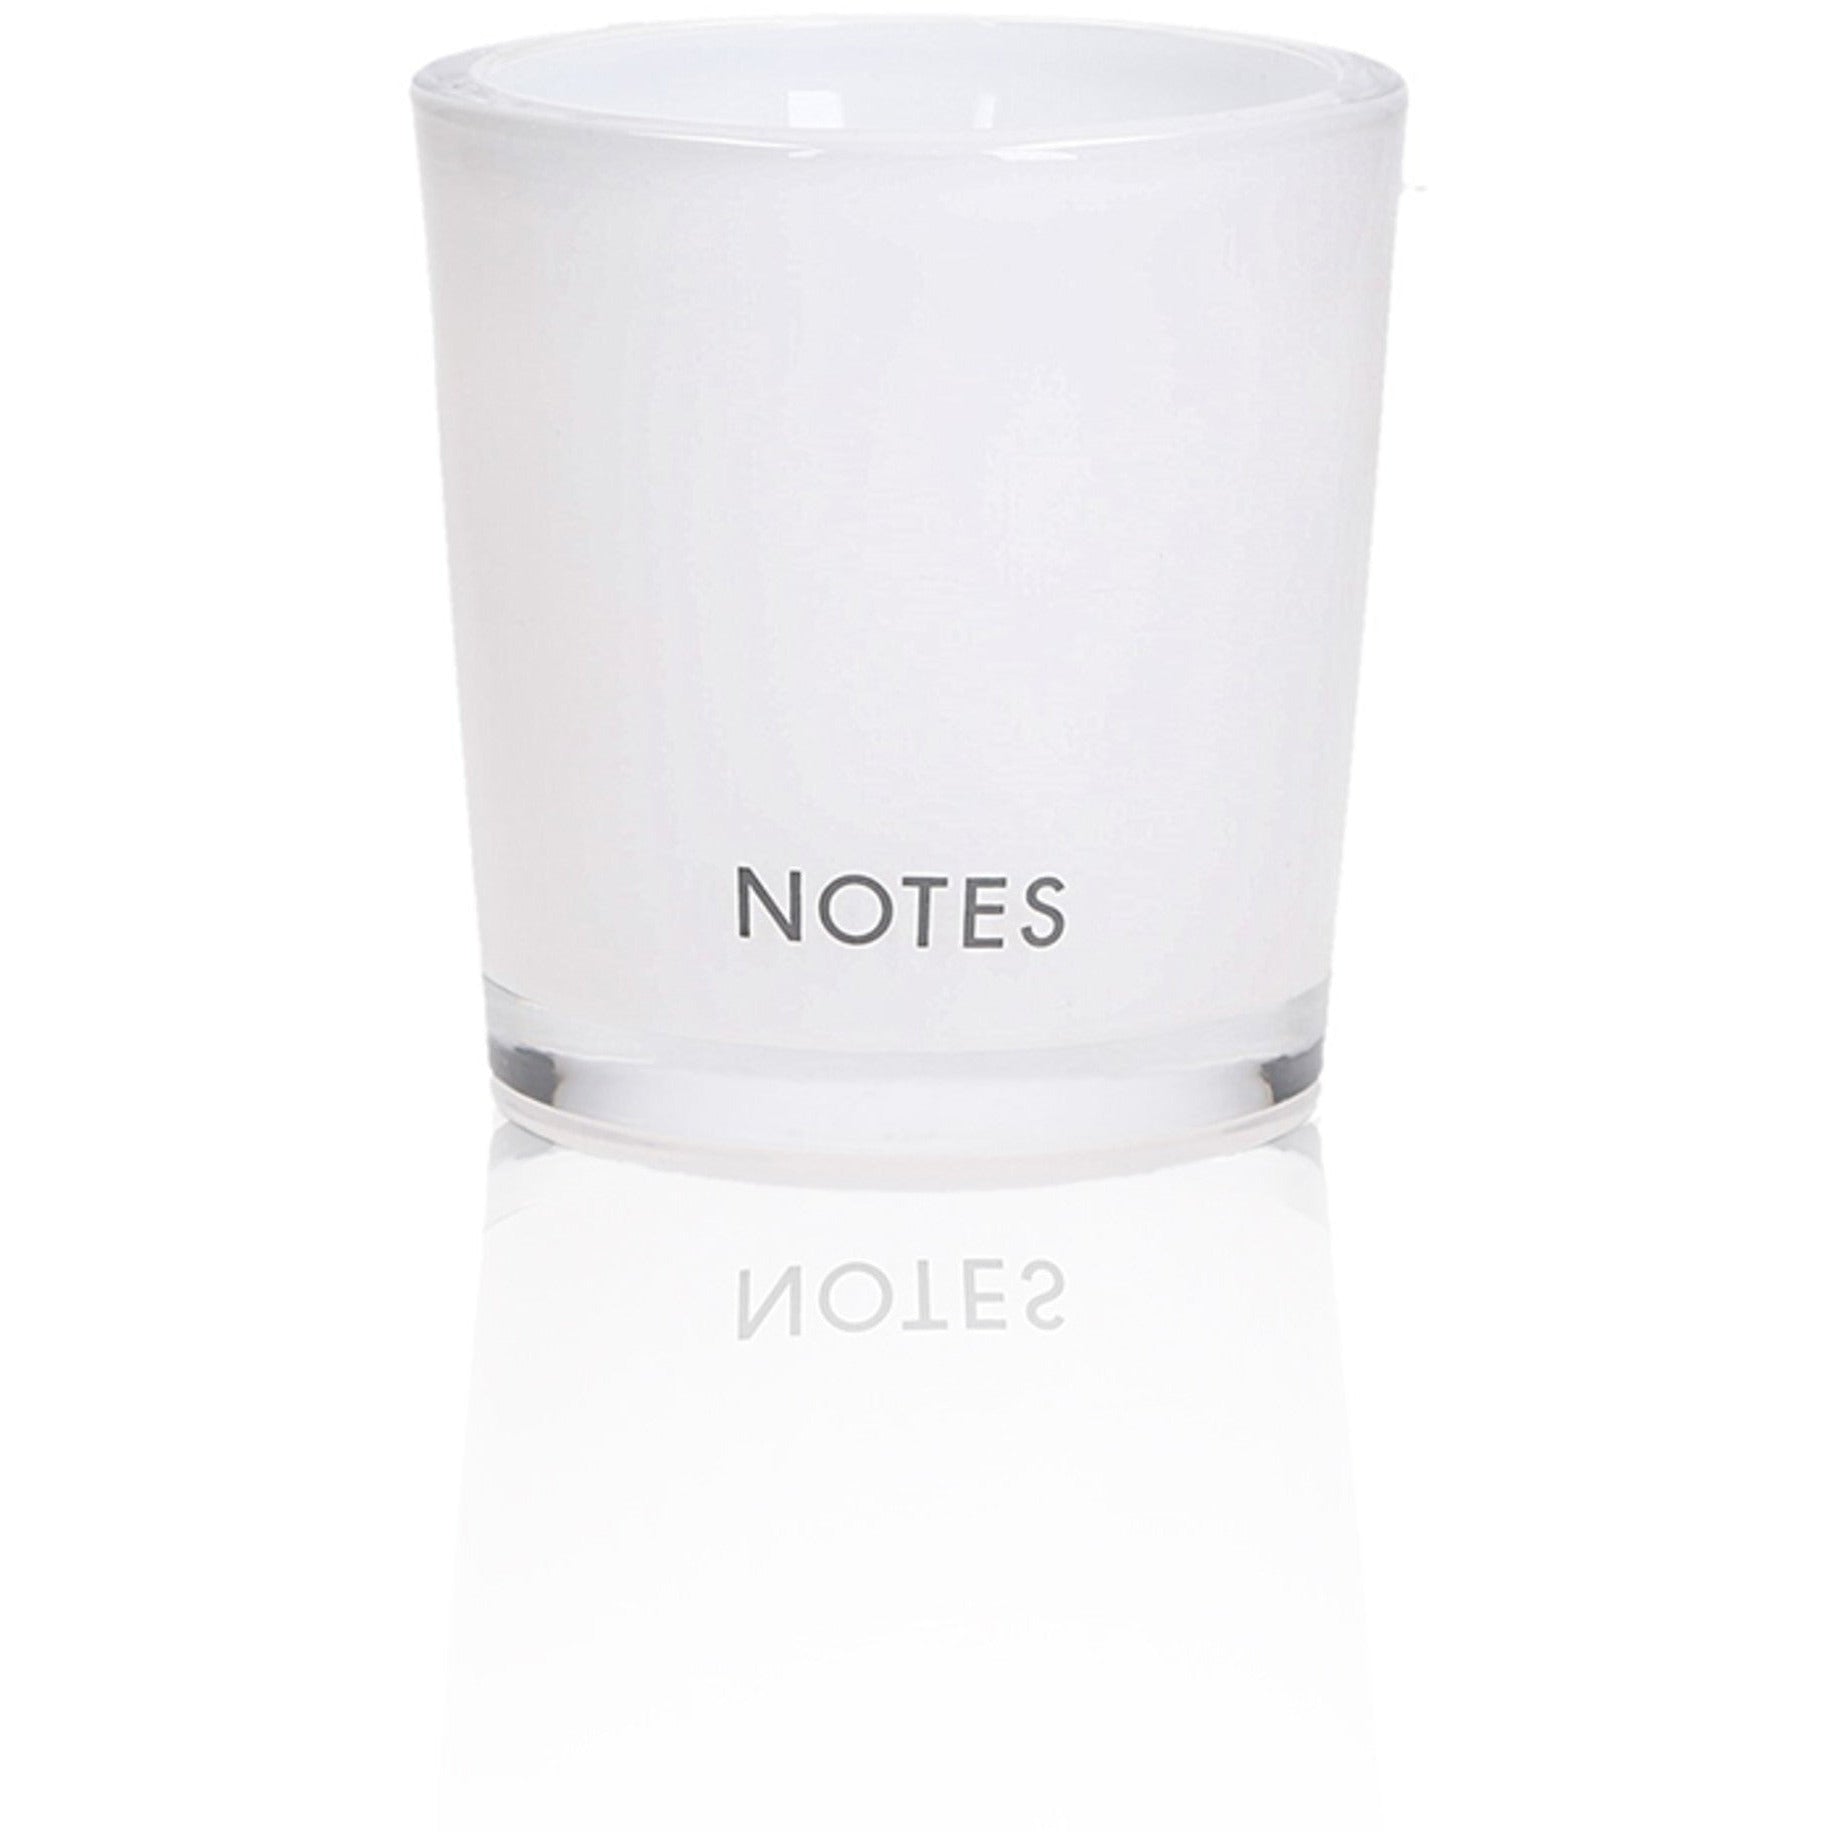 NOTES Candle Refill System - Starter Candle Jar